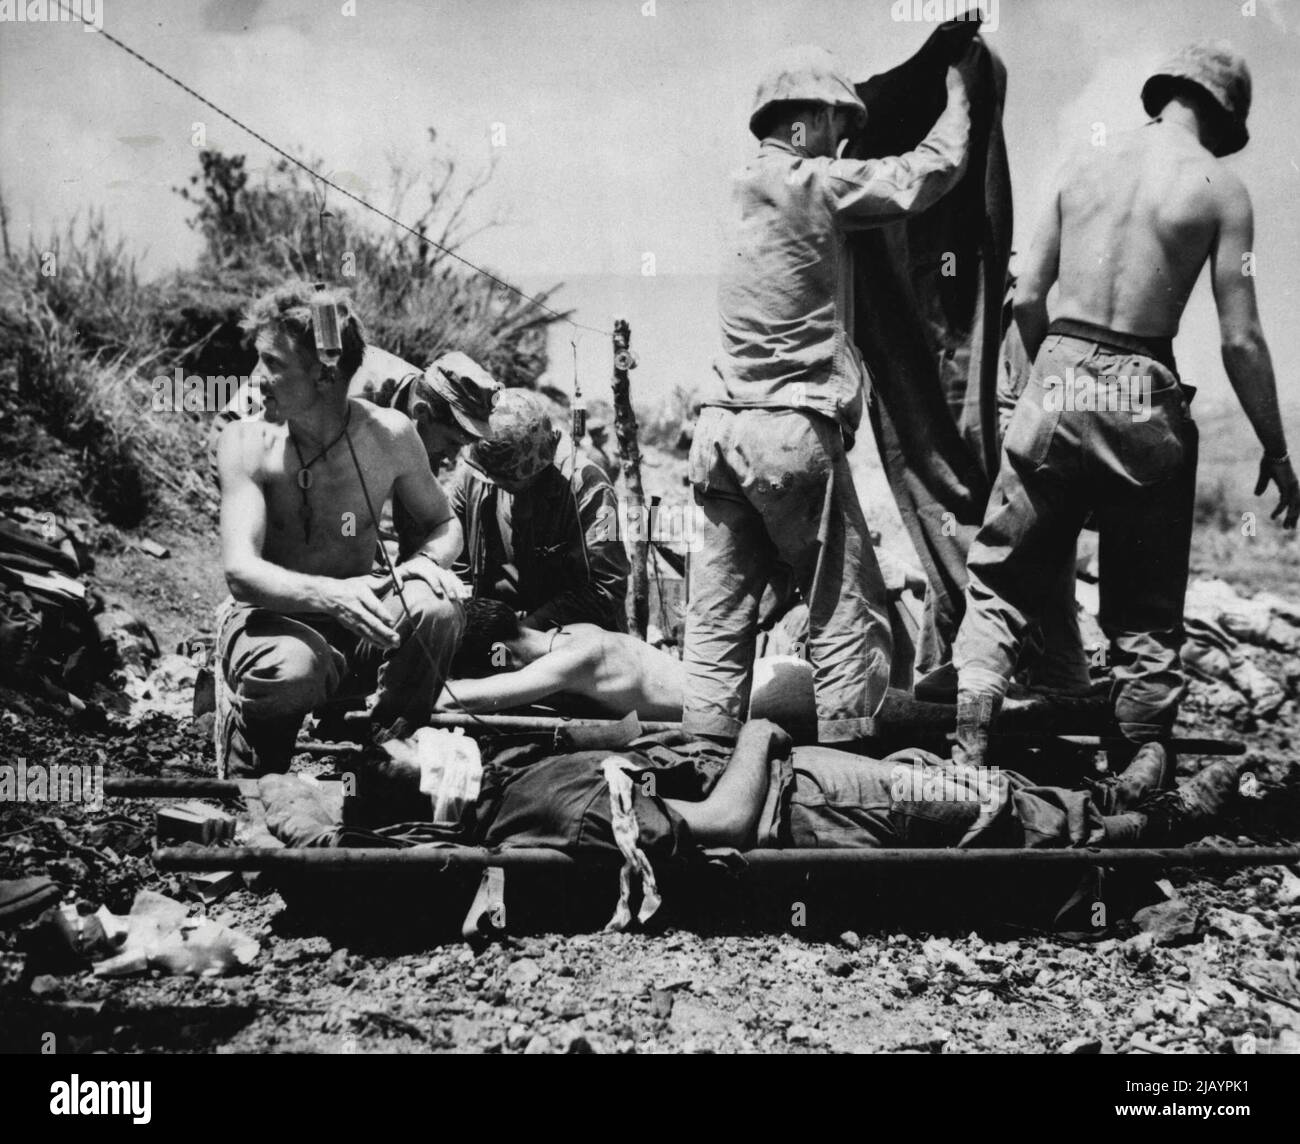 Aid For Wounded On Okinawa -- Wounded troops on Okinawa are given first aid at a forward station. Corpsmen have strung a wire to hold bottles of blood plasma. May 30, 1945. (Photo by Associated Press Photo). Stock Photo